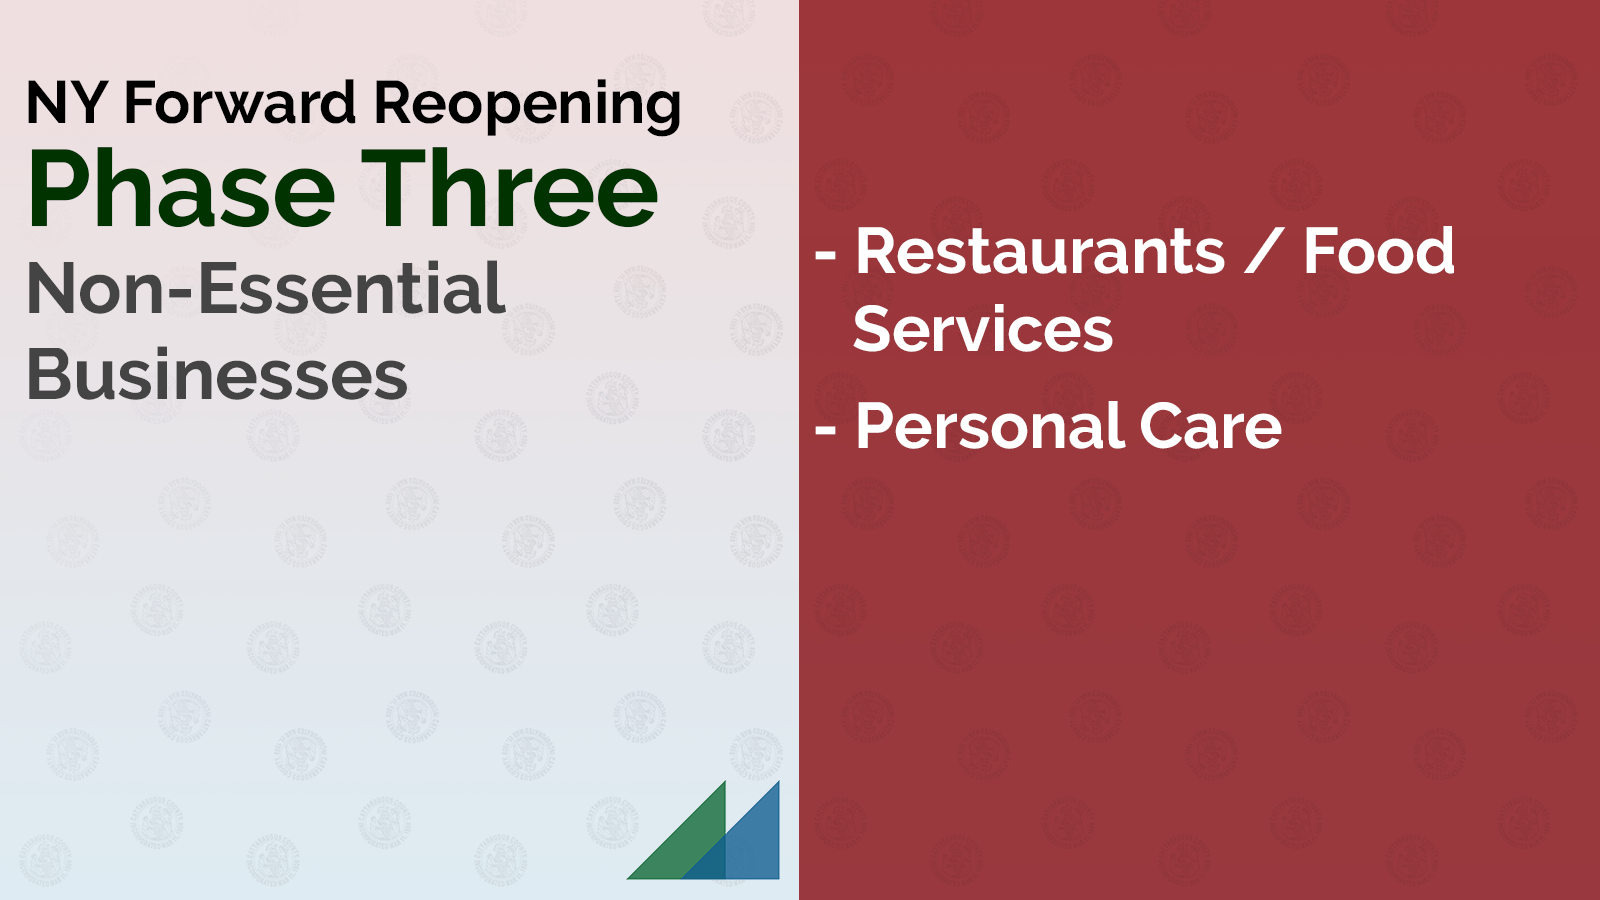 NY Forward Reopening Phase Three: Restaurants / Food Services and Personal Care